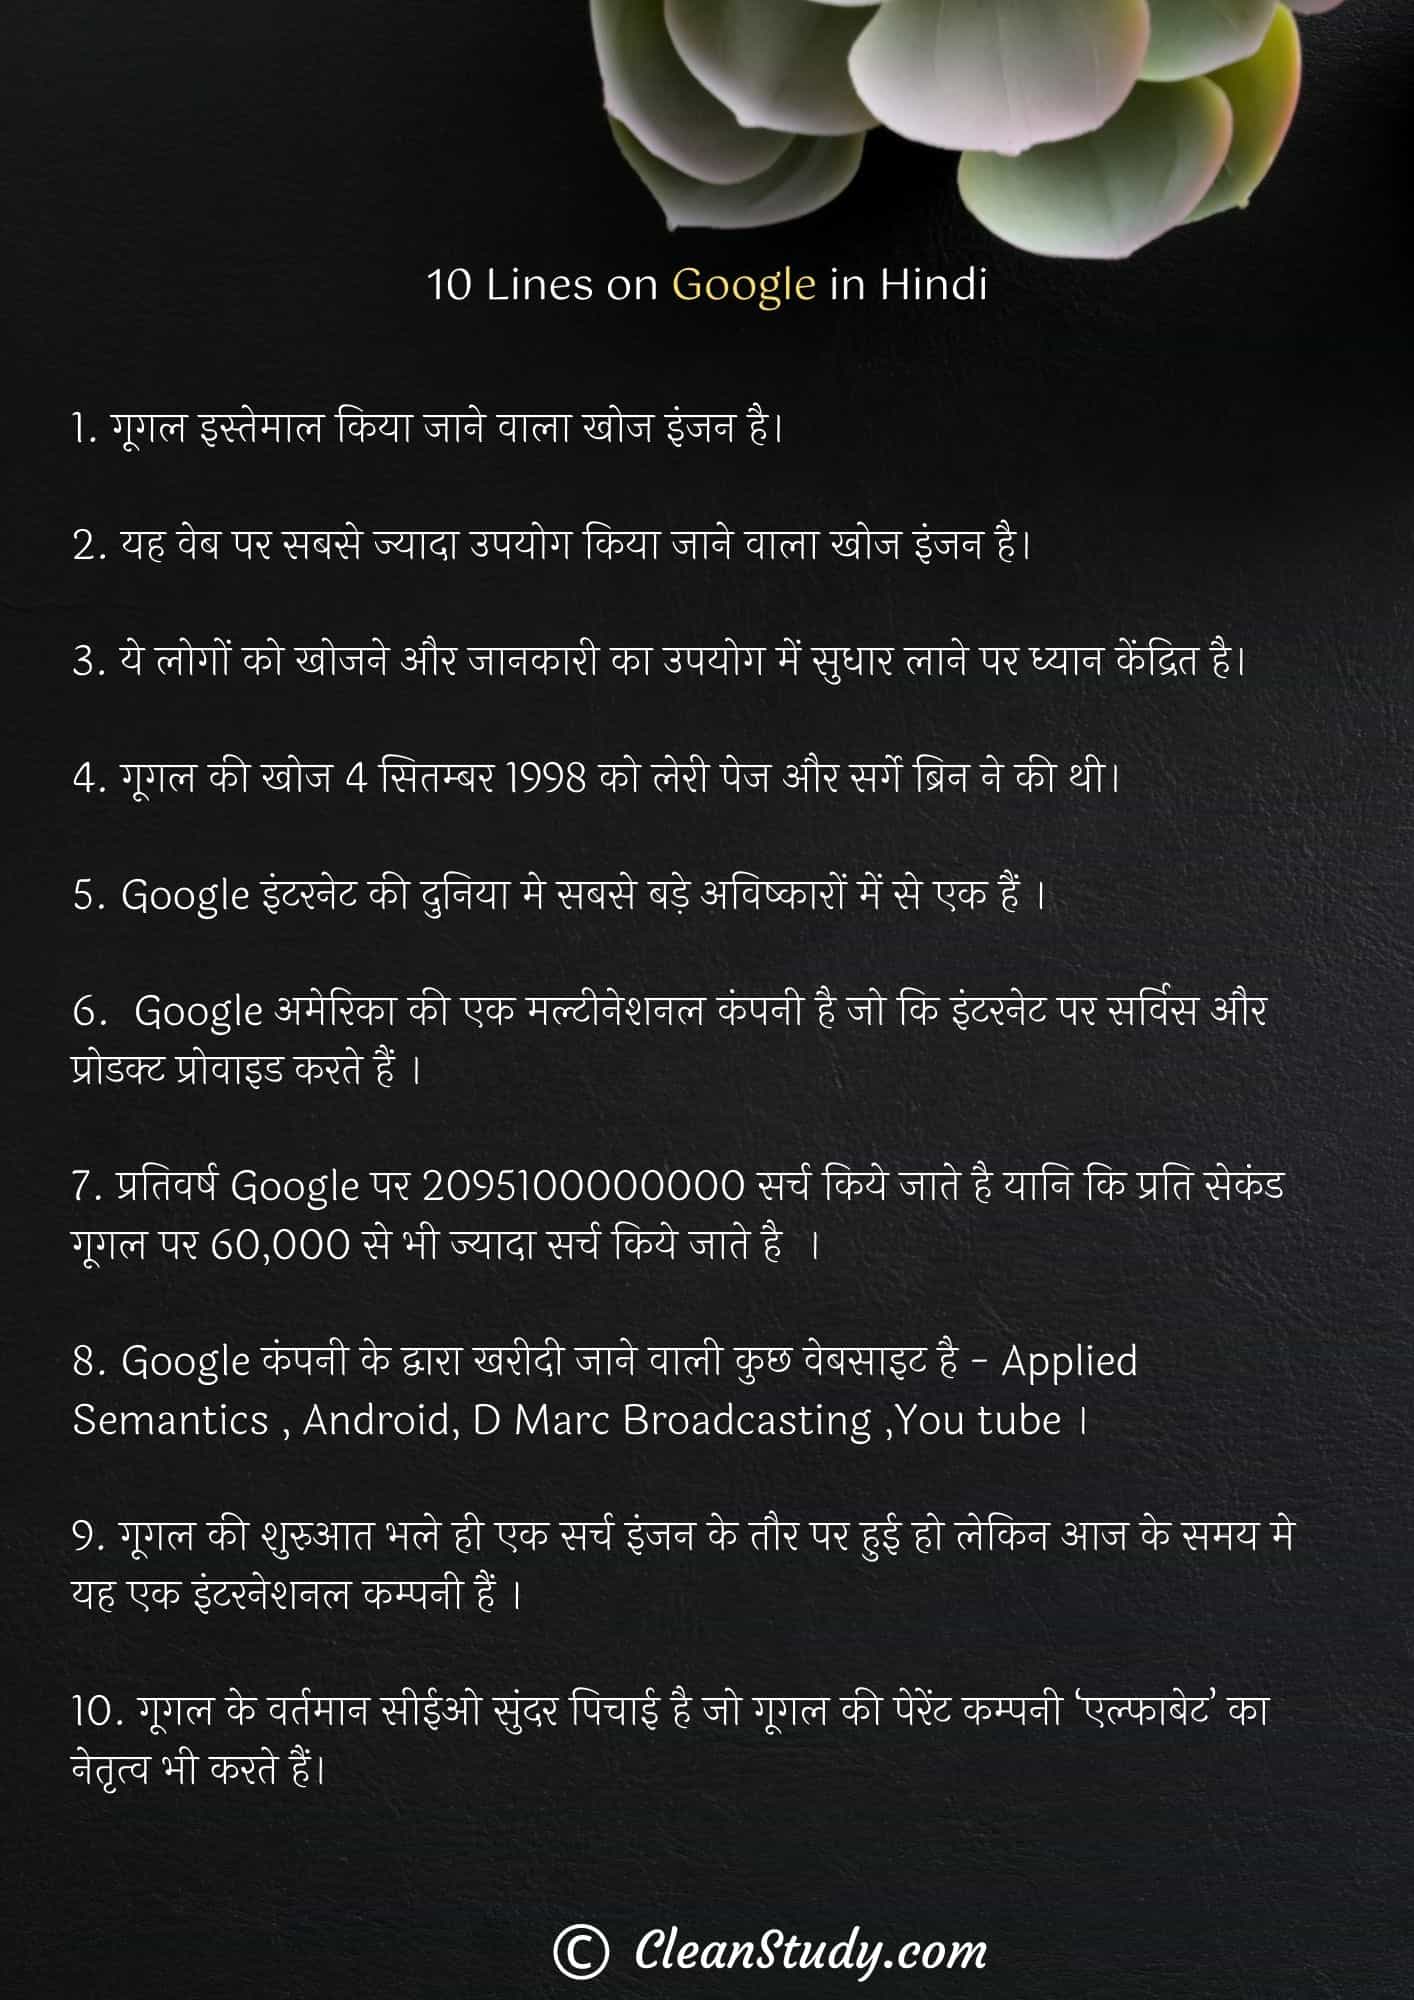 10 Lines on Google in Hindi